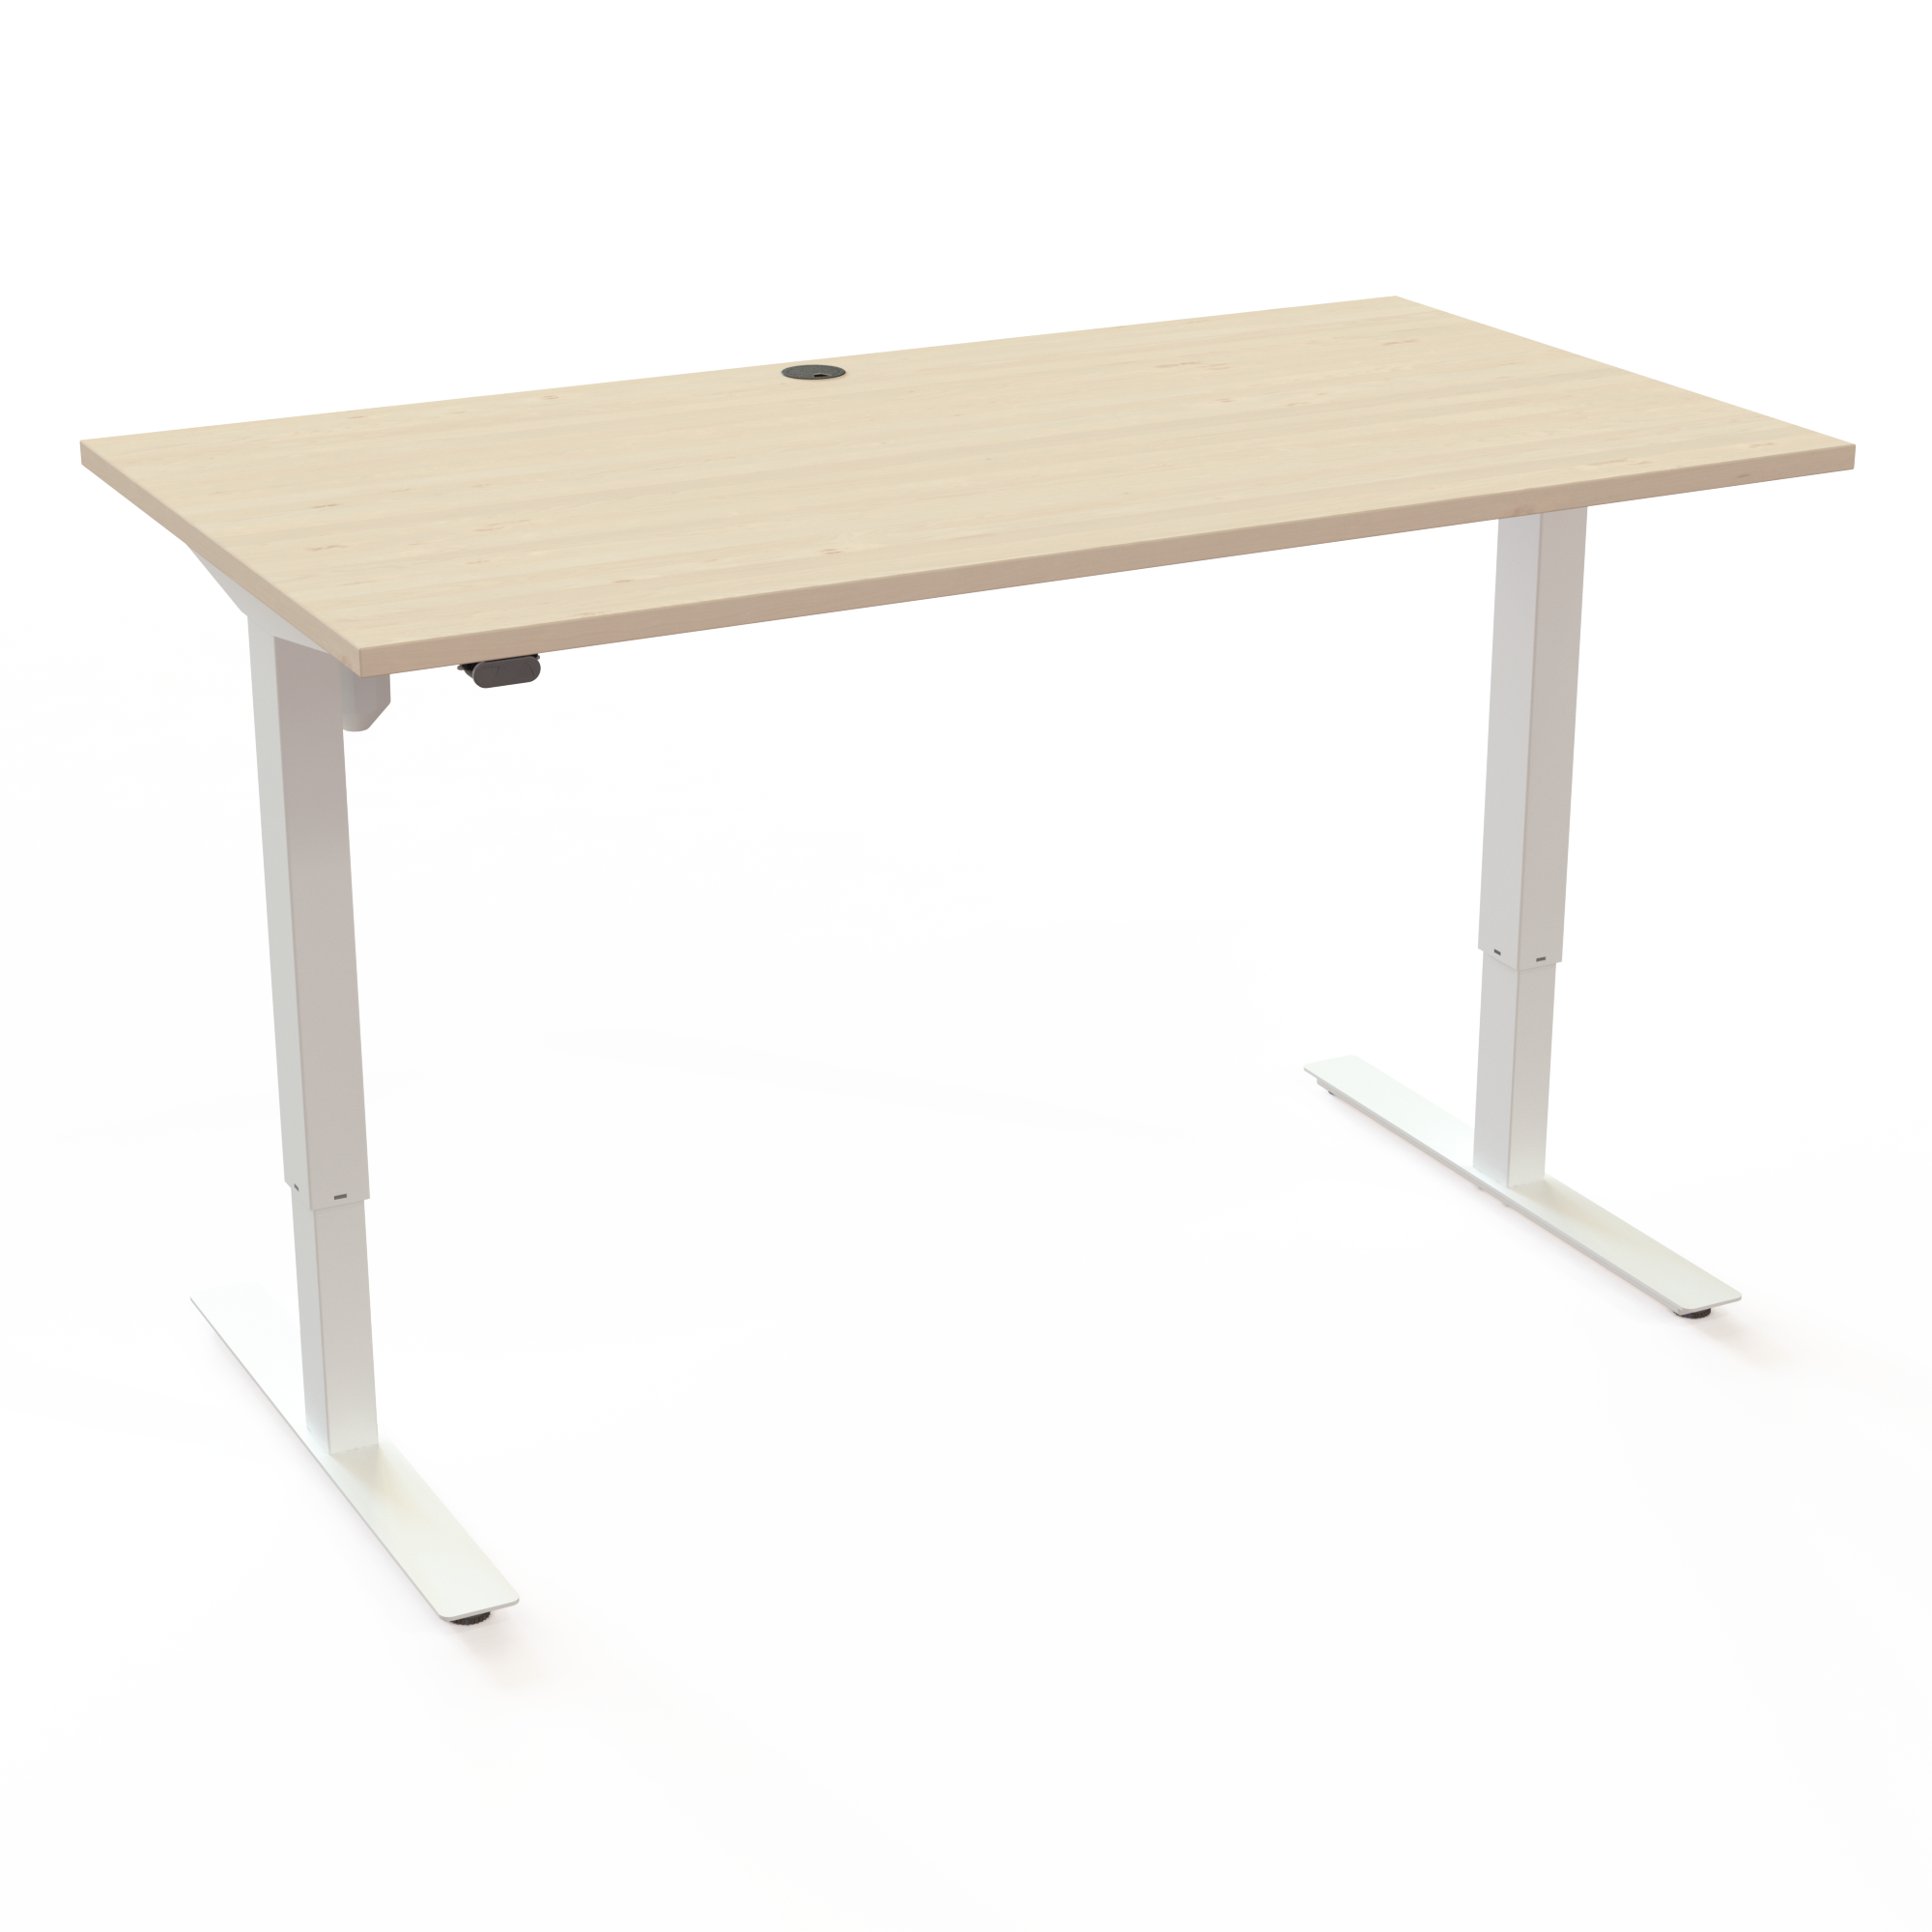 Electric Adjustable Desk | 150x80 cm | Maple with white frame